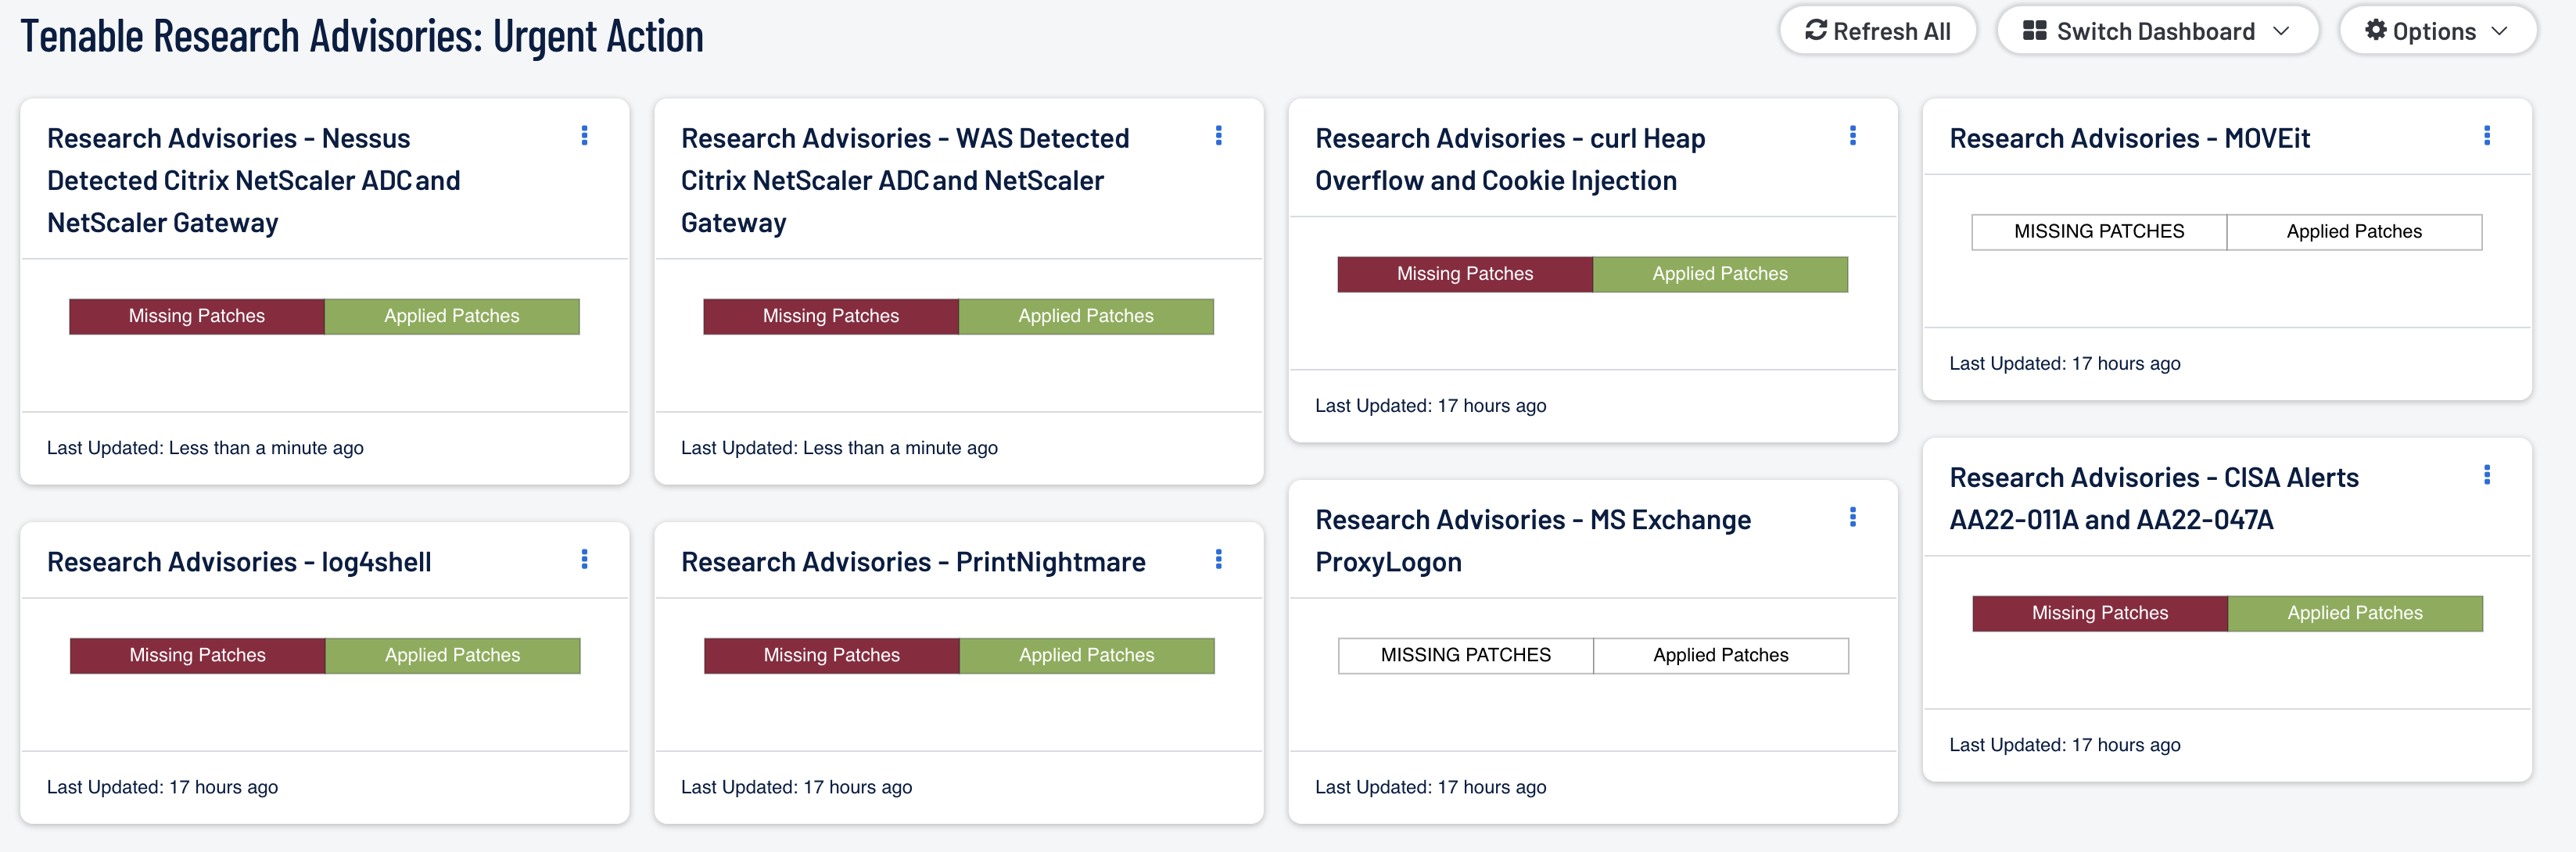 Tenable Research Advisories: Urgent Action Dashboard